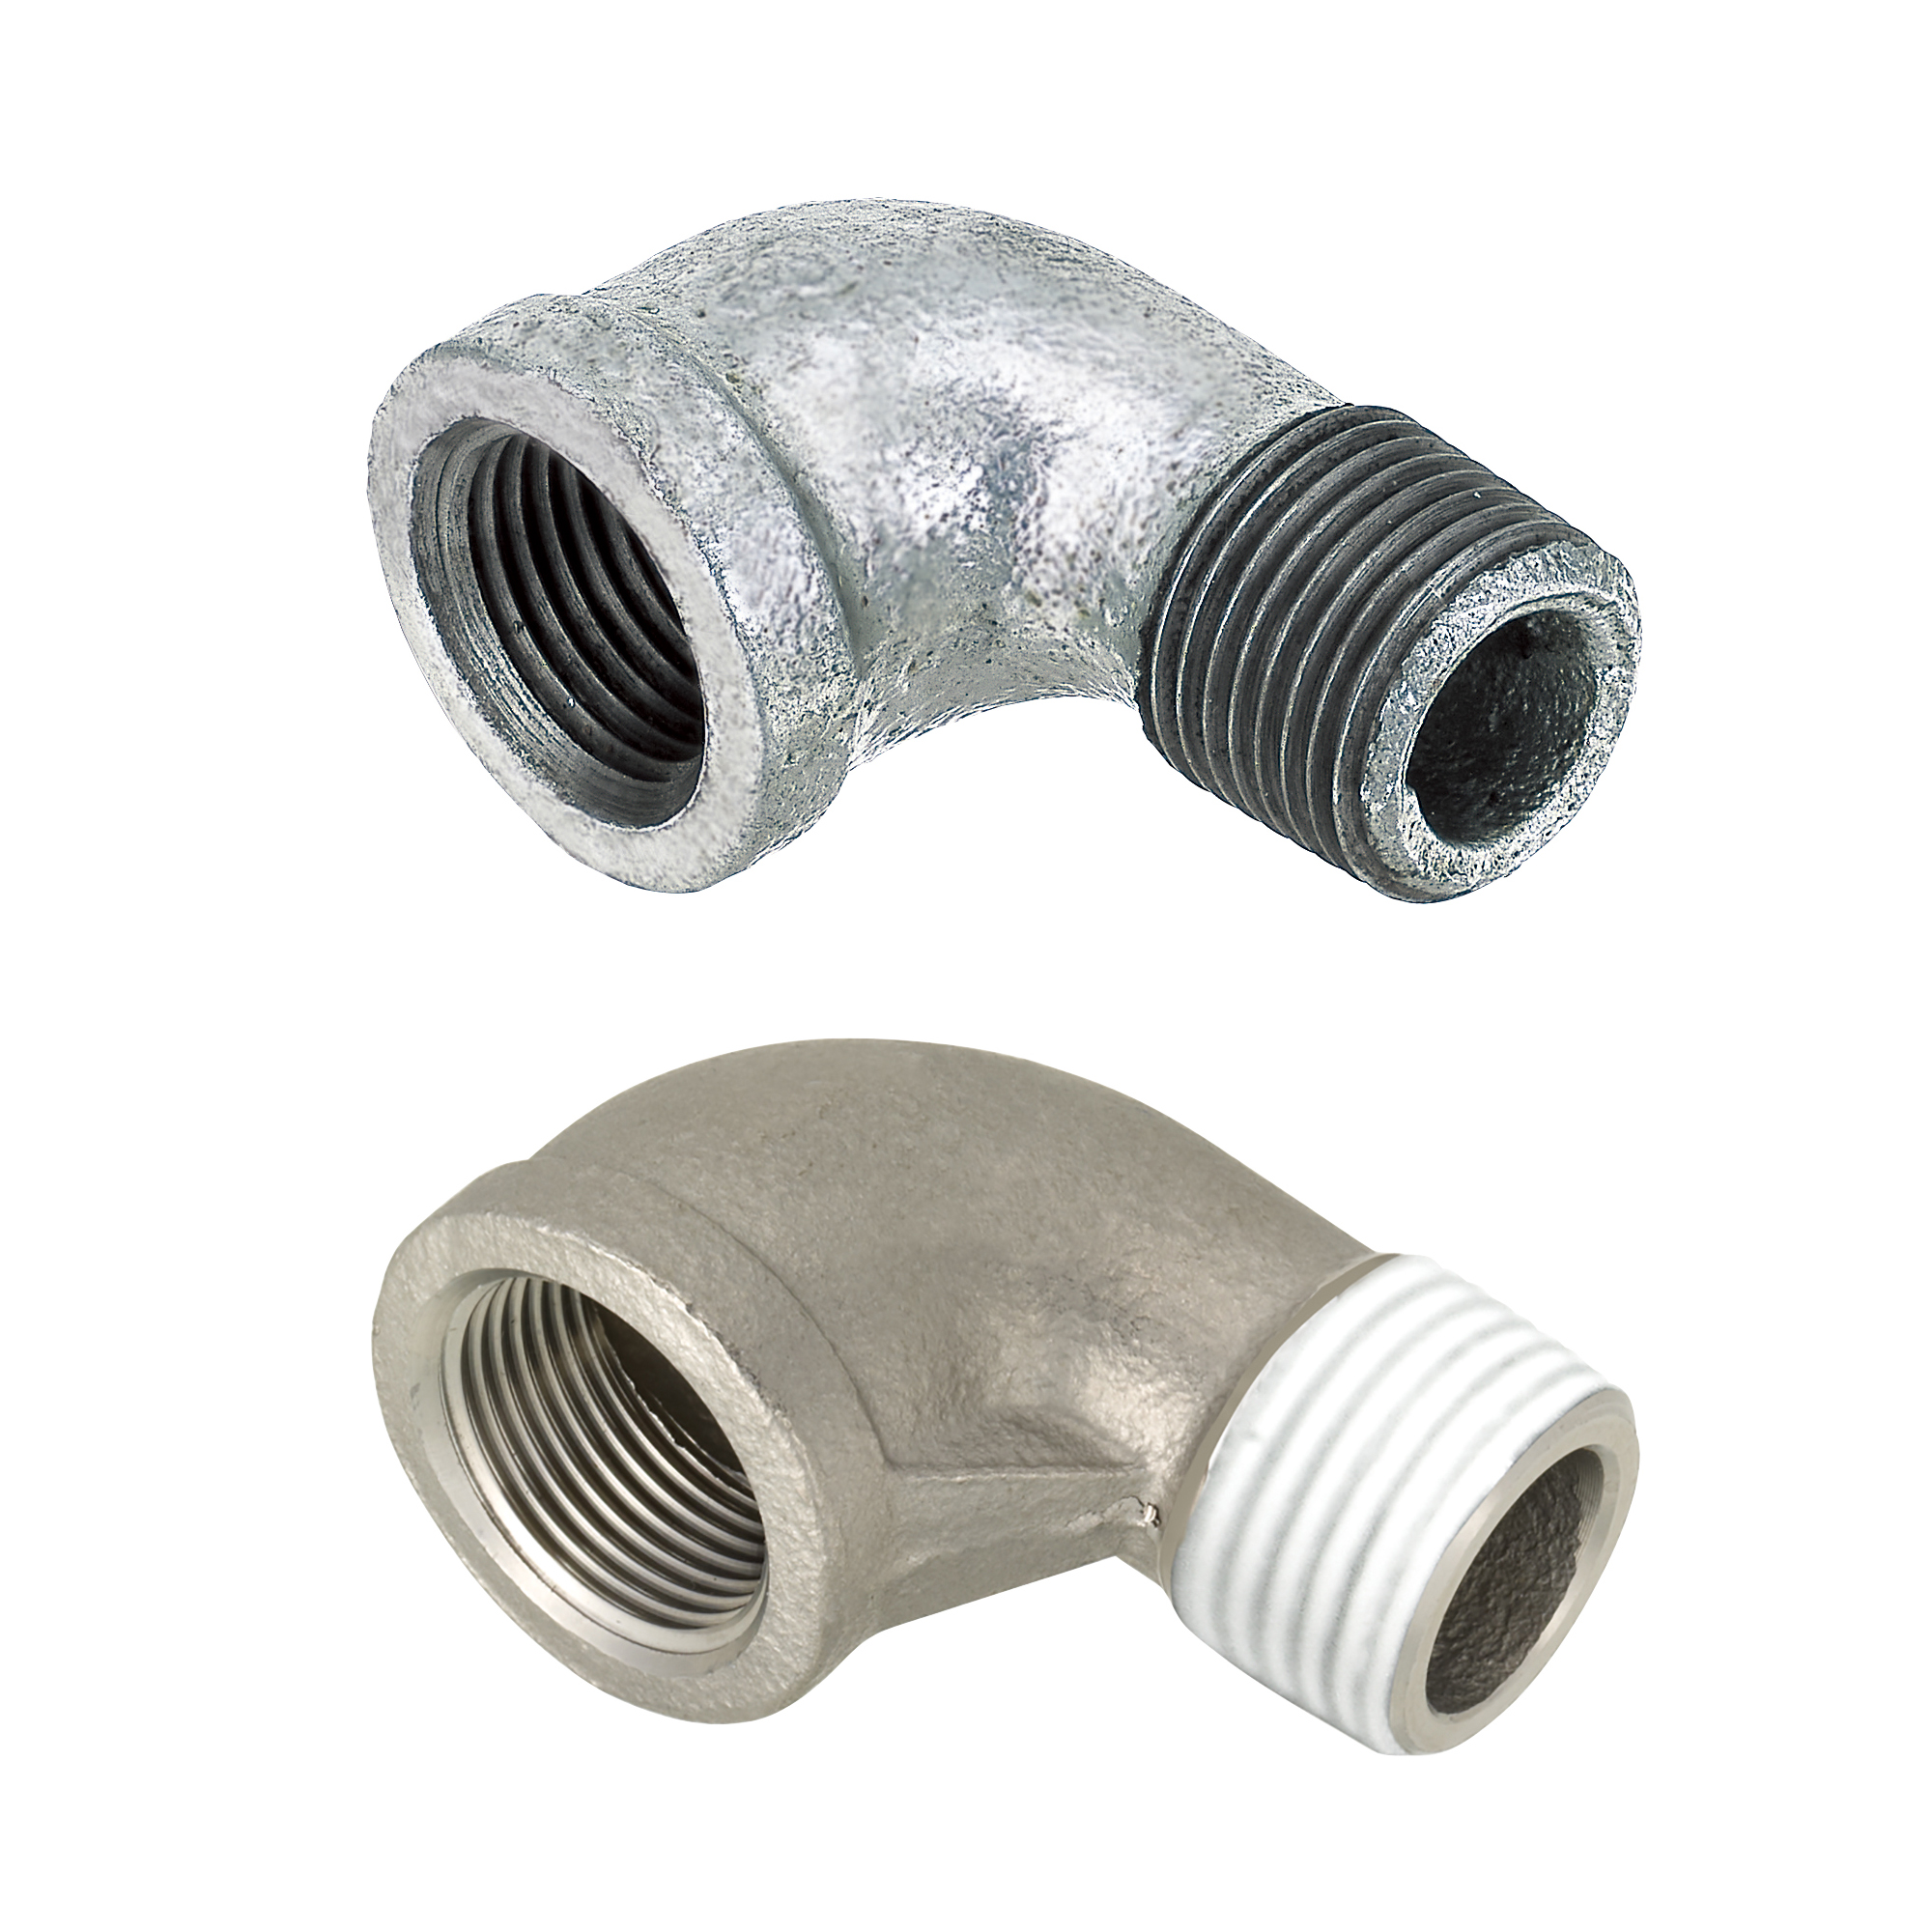 Low Pressure Fittings/90 Deg. Elbow/Threaded and Tapped SUCEL15A